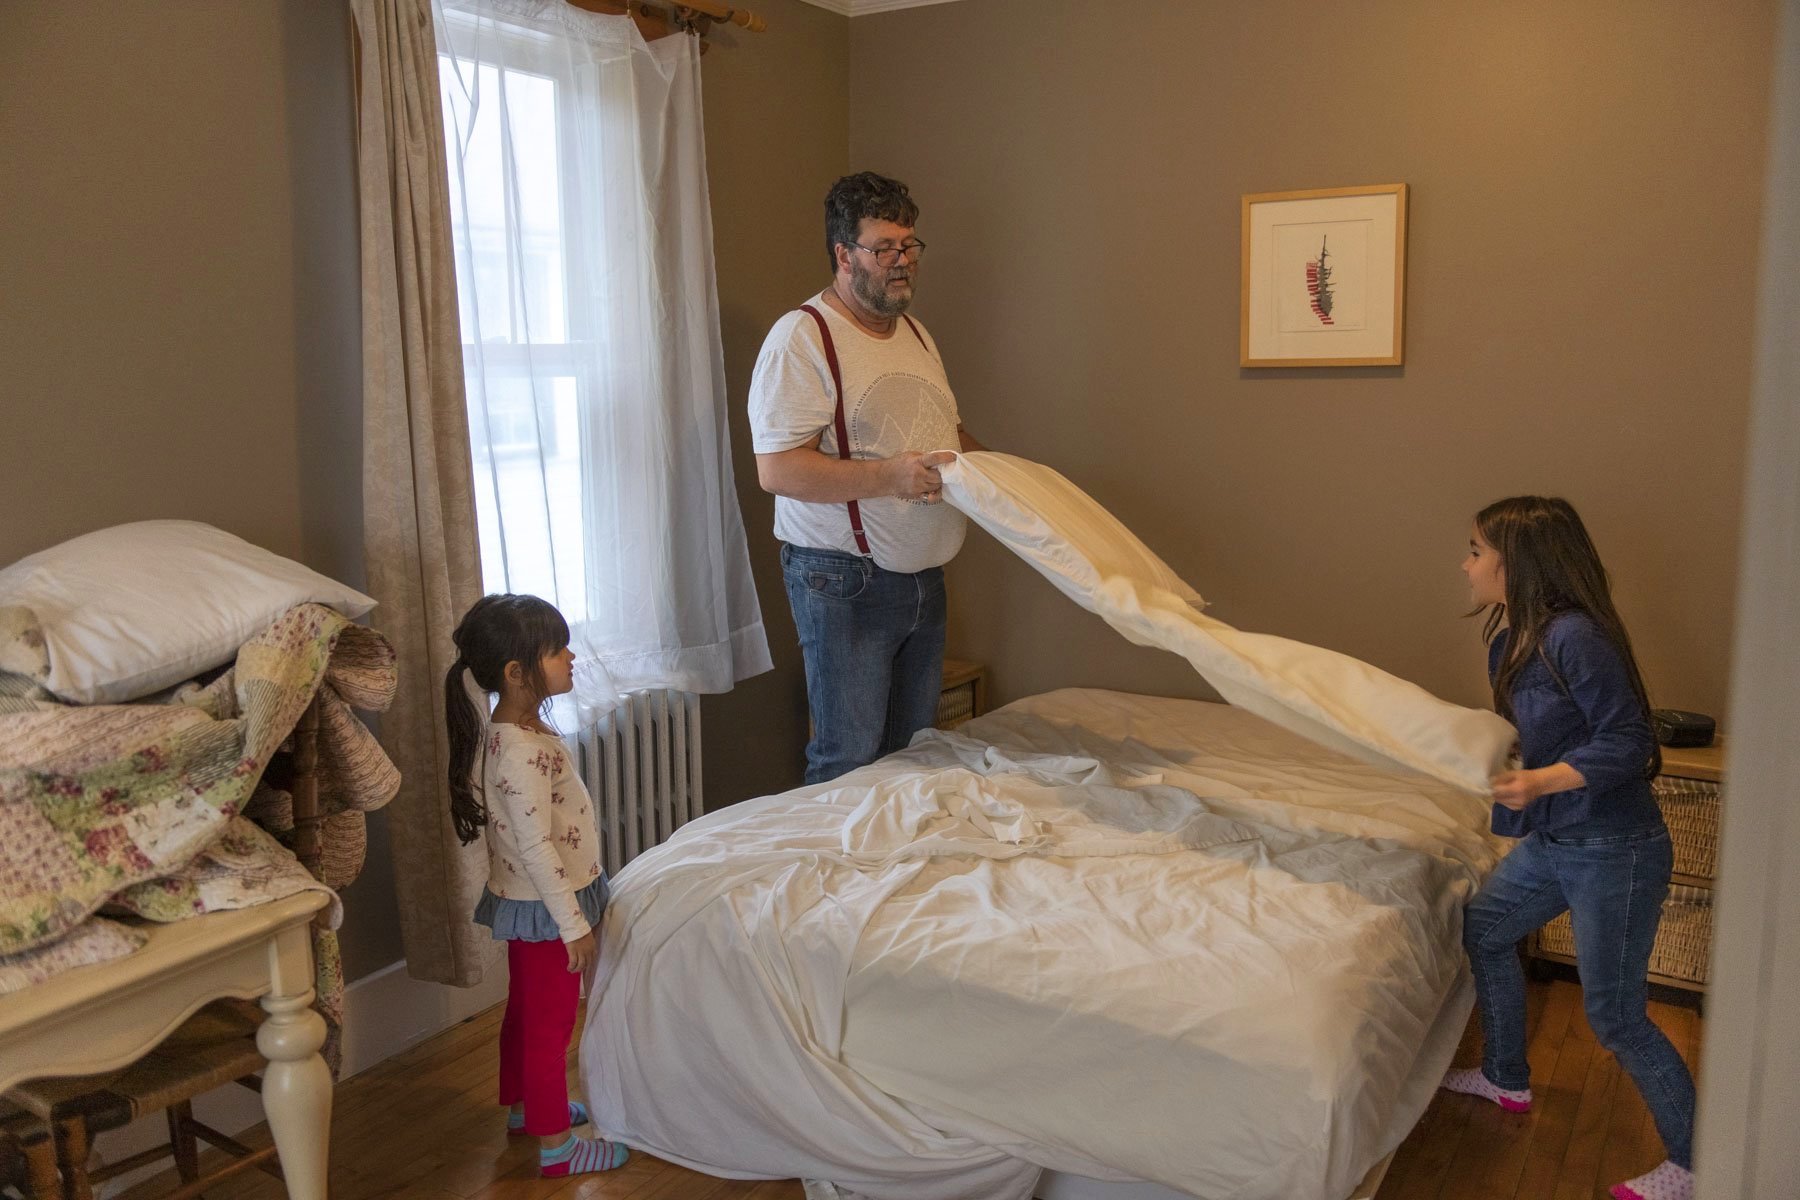  Serge Paradis and his daughters clean up a guest room at their bed and breakfast in the mining village of Bourlamaque. The bed and breakfast was originally a pension home that welcomed single workers from Europe to work at the mine. Today, patrons a